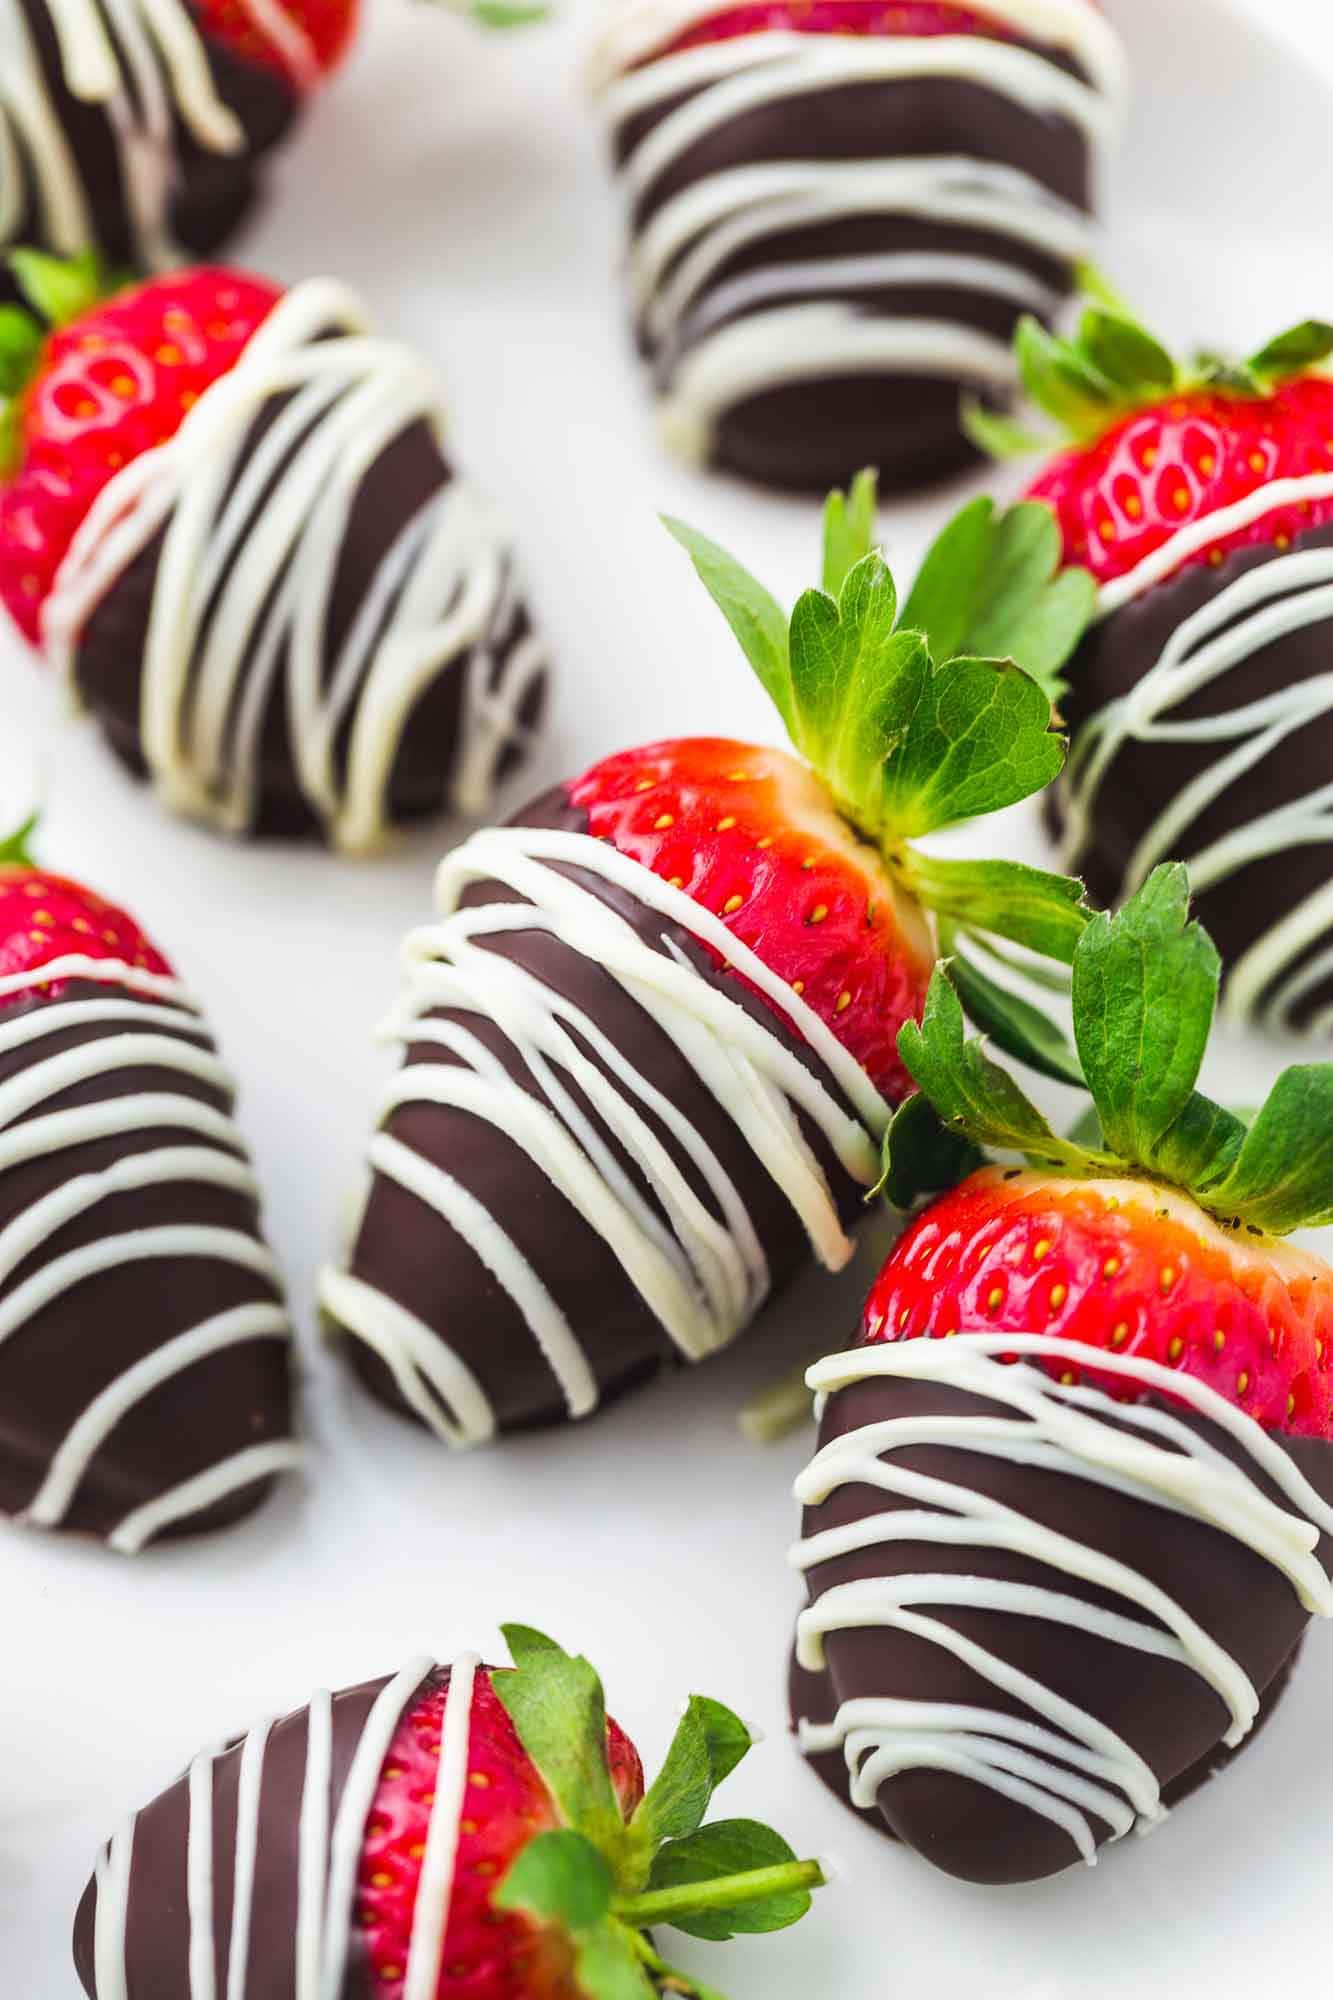 Close up image of chocolate covered strawberries with white chocolate drizzle